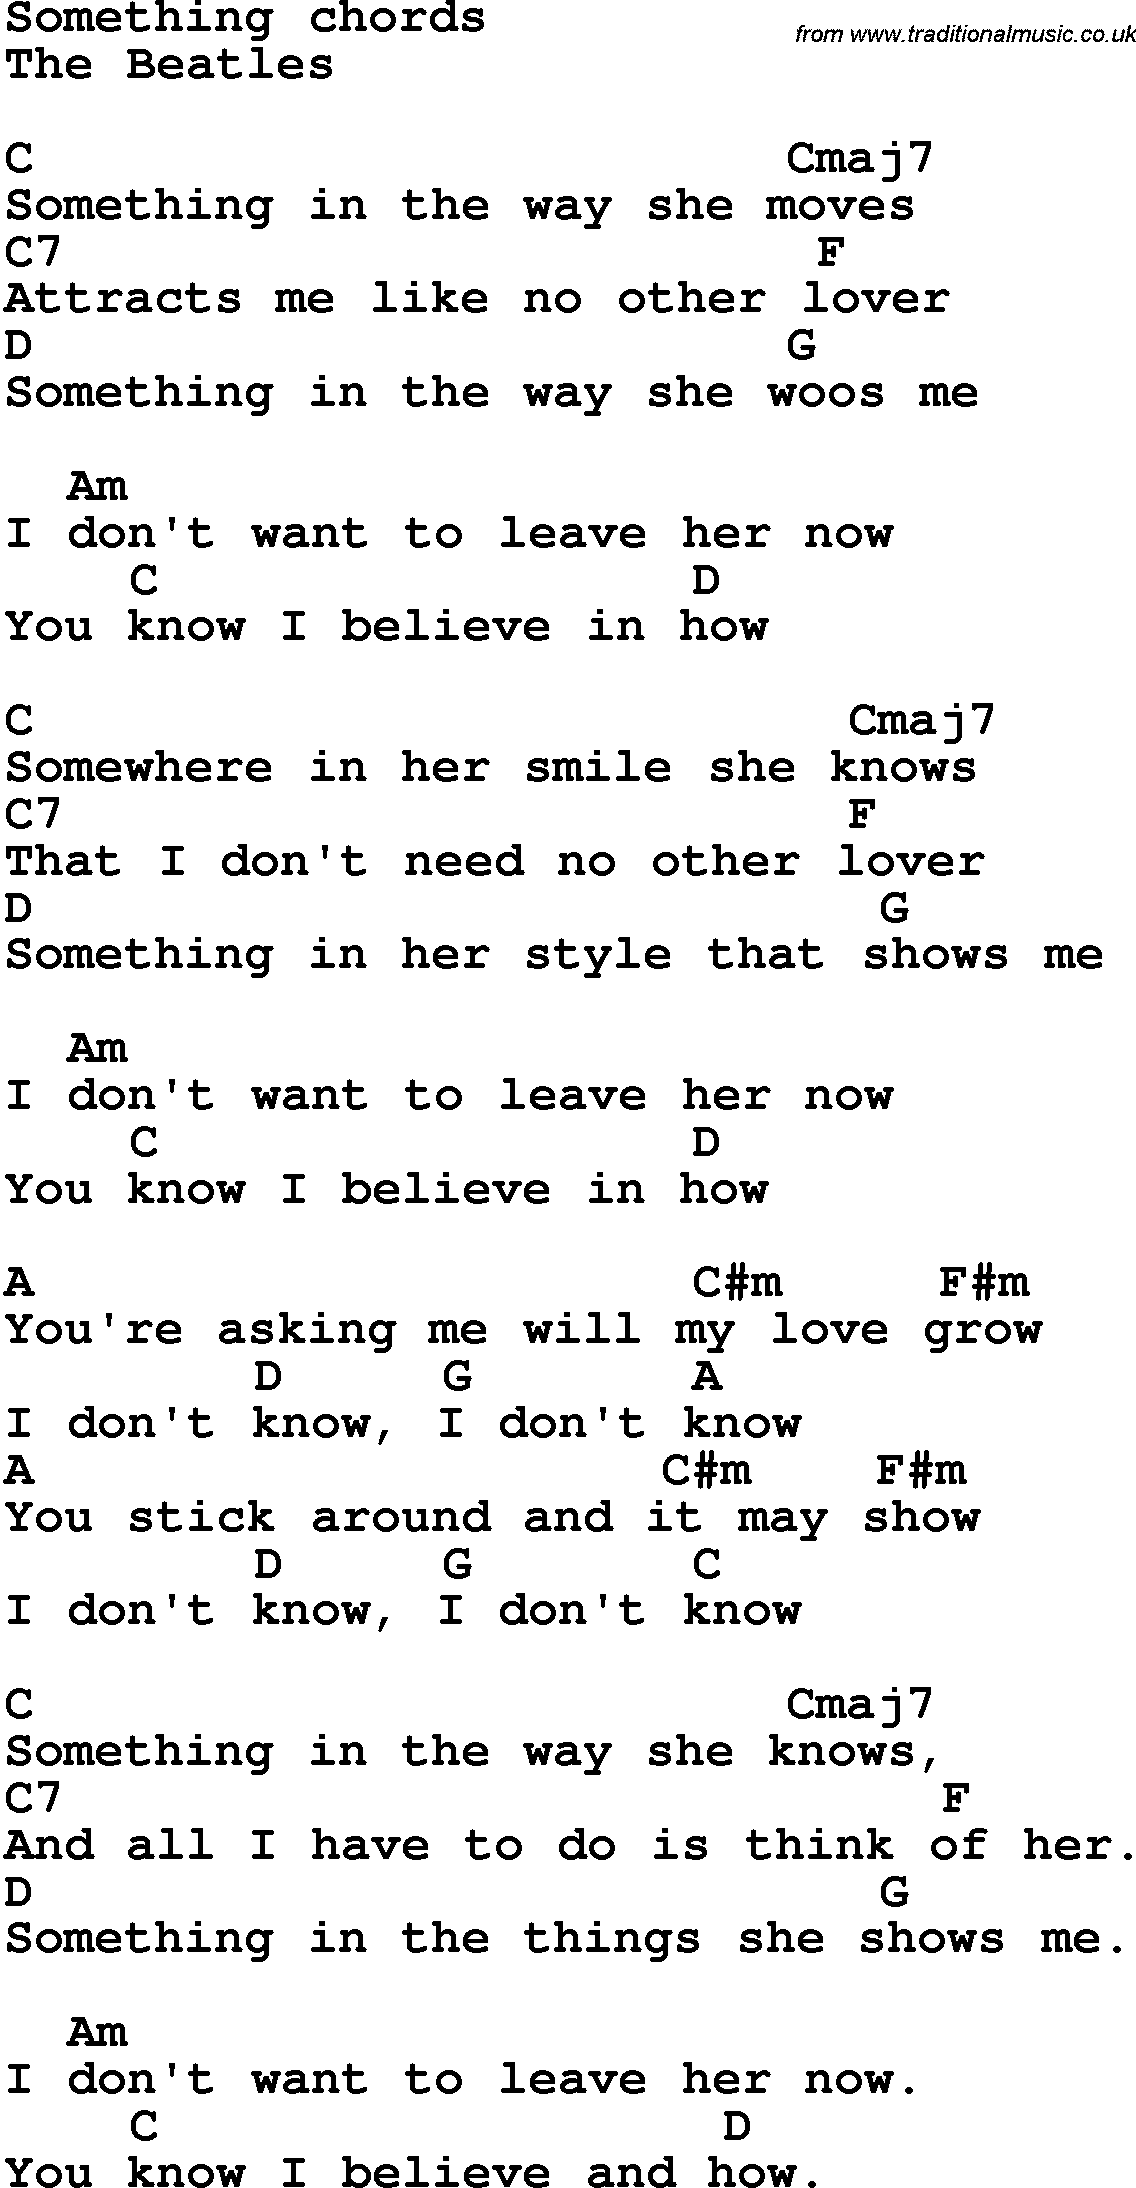 Song Lyrics with guitar chords for Something - The Beatles